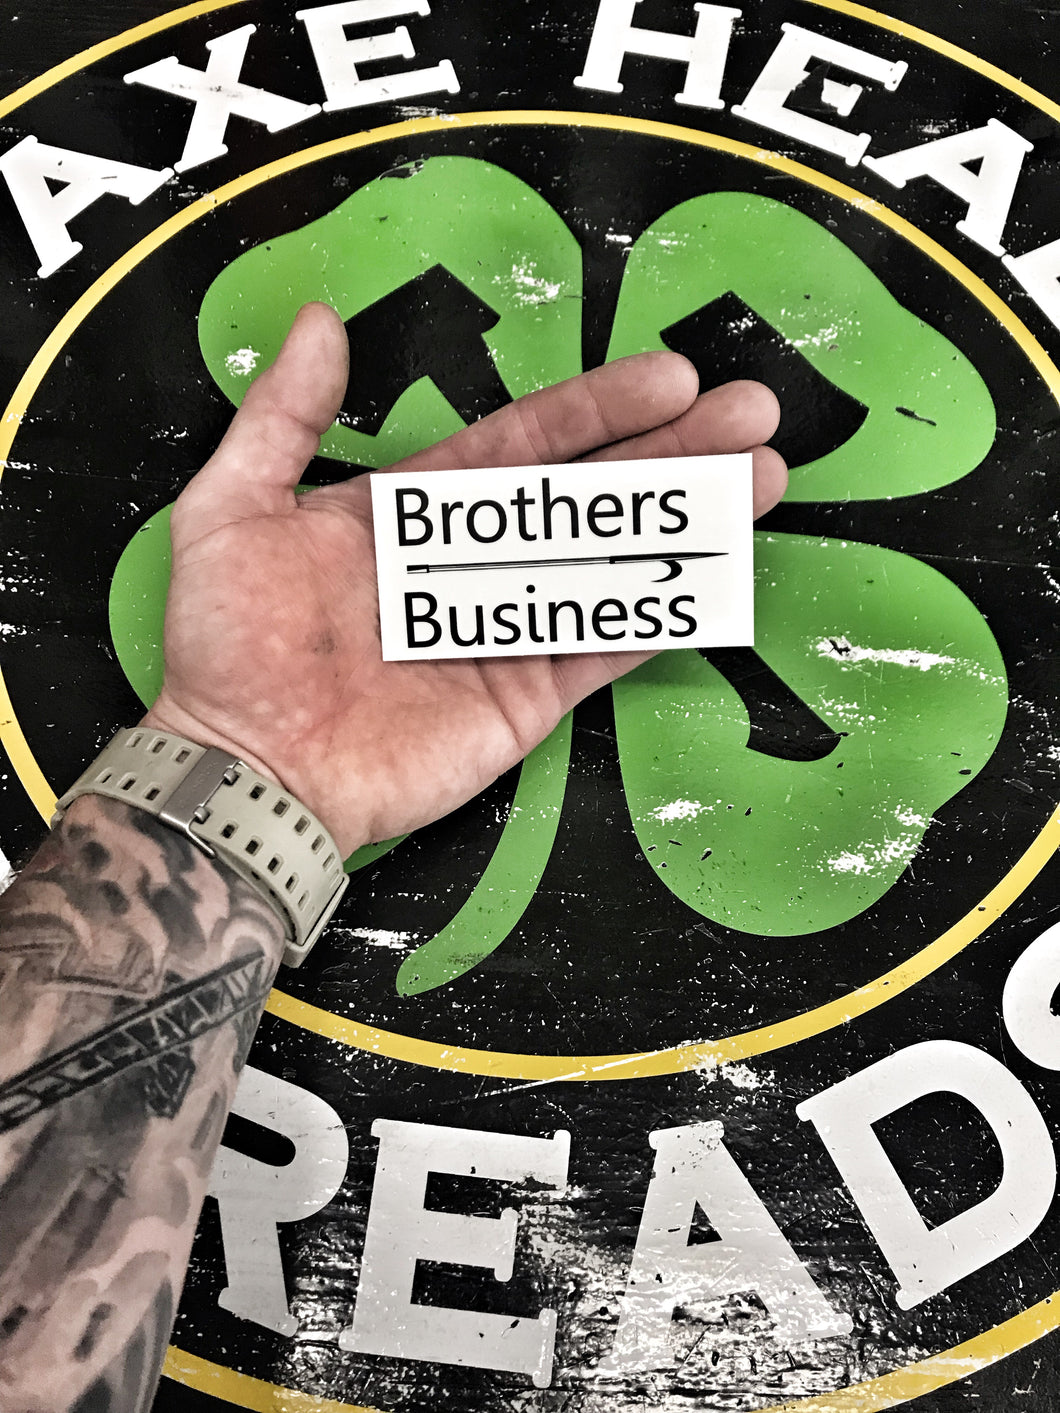 Brothers OVER Business Sticker Decal